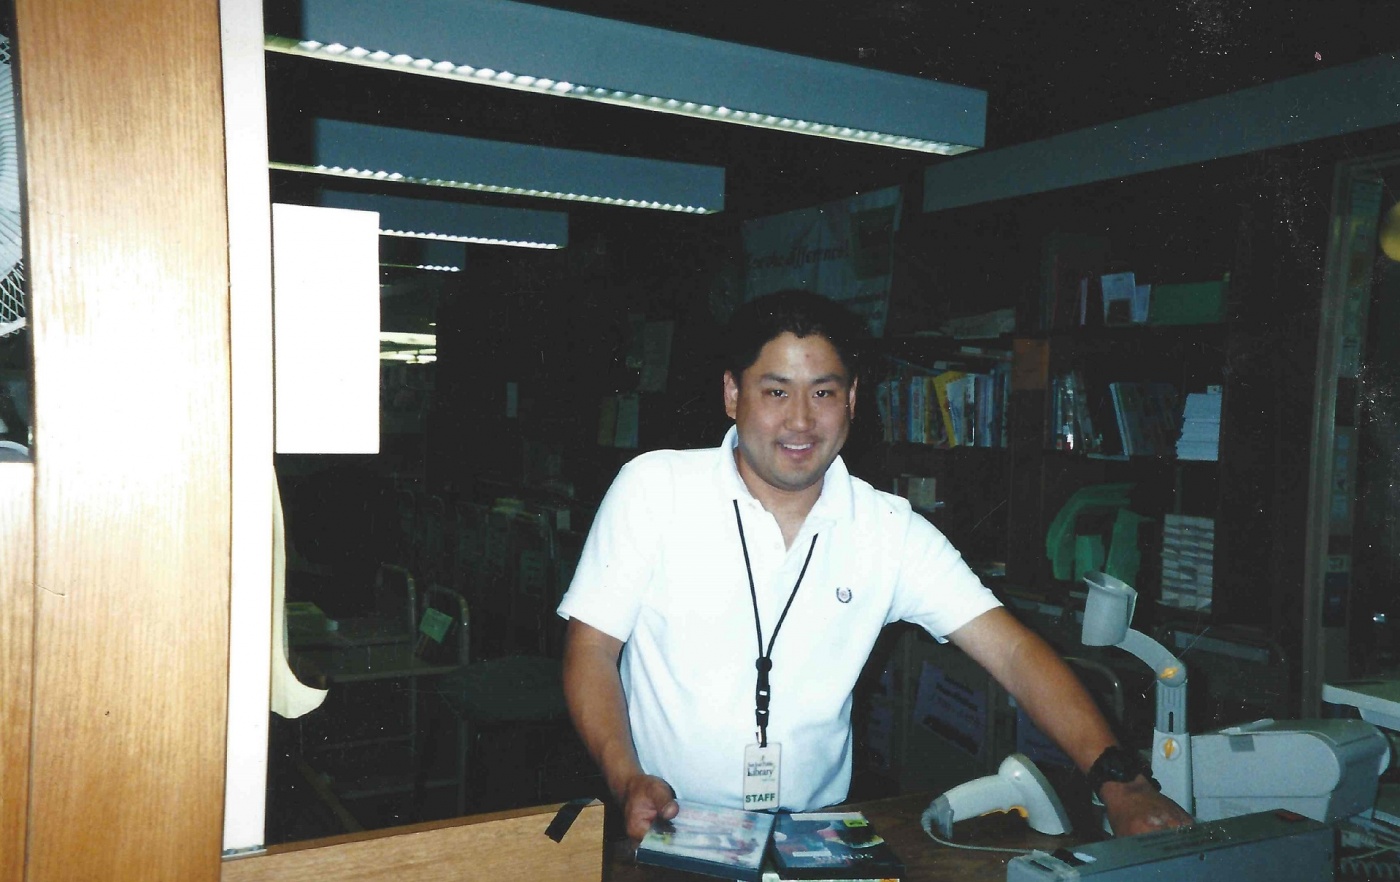 Scott Kimizuka started in 1981 at SJPL as a Page. Old picture of Scott doing materials handling